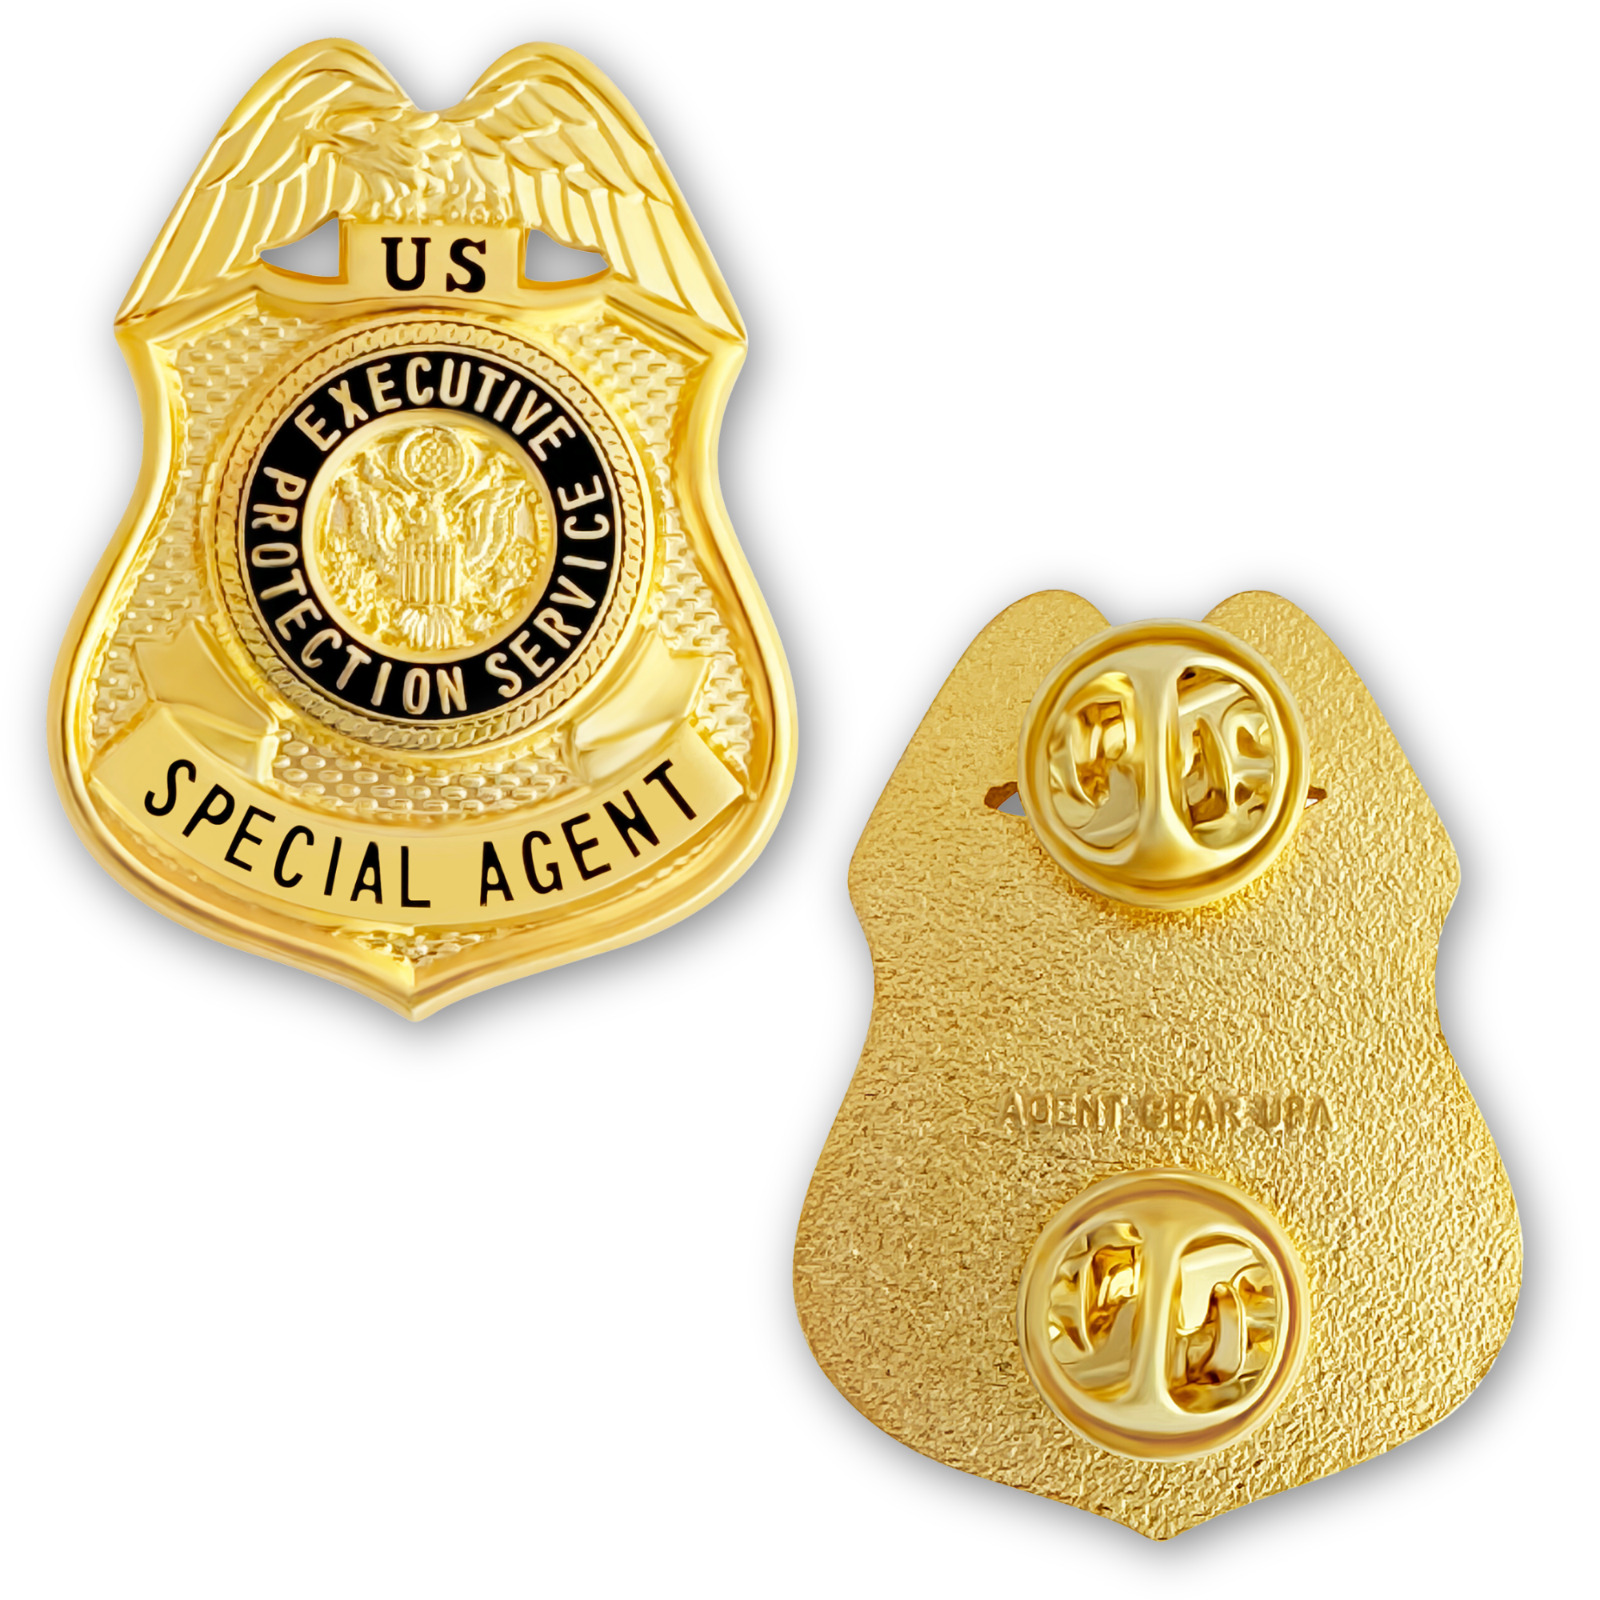 Executive Protection Service Special Agent - Mini Badge Lapel Pin